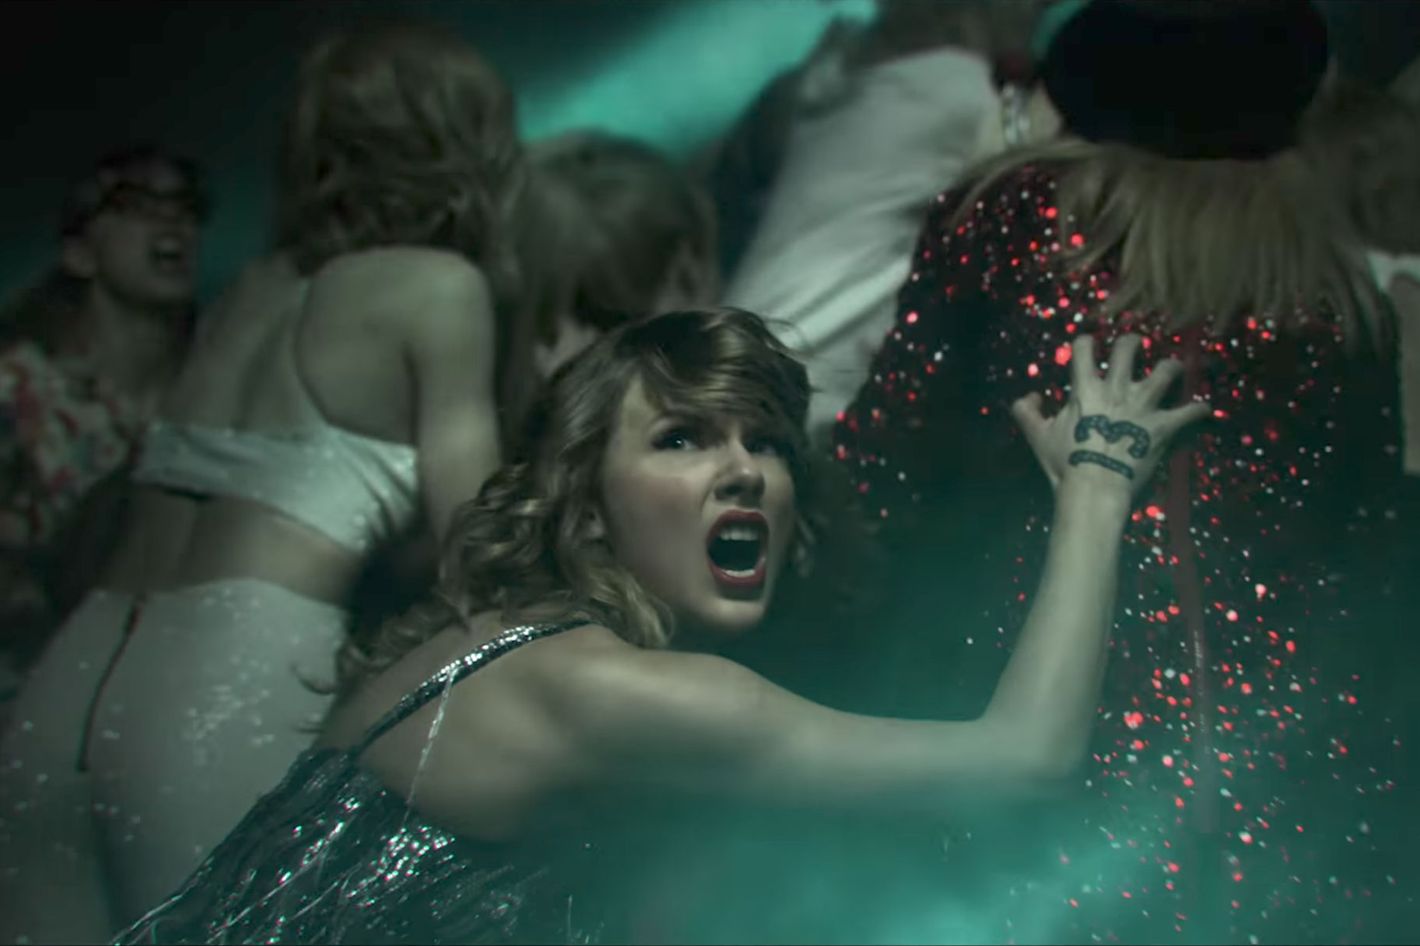 Taylor Swift Dancer Reveals the Real Meaning of 'Look What You Made Me Do